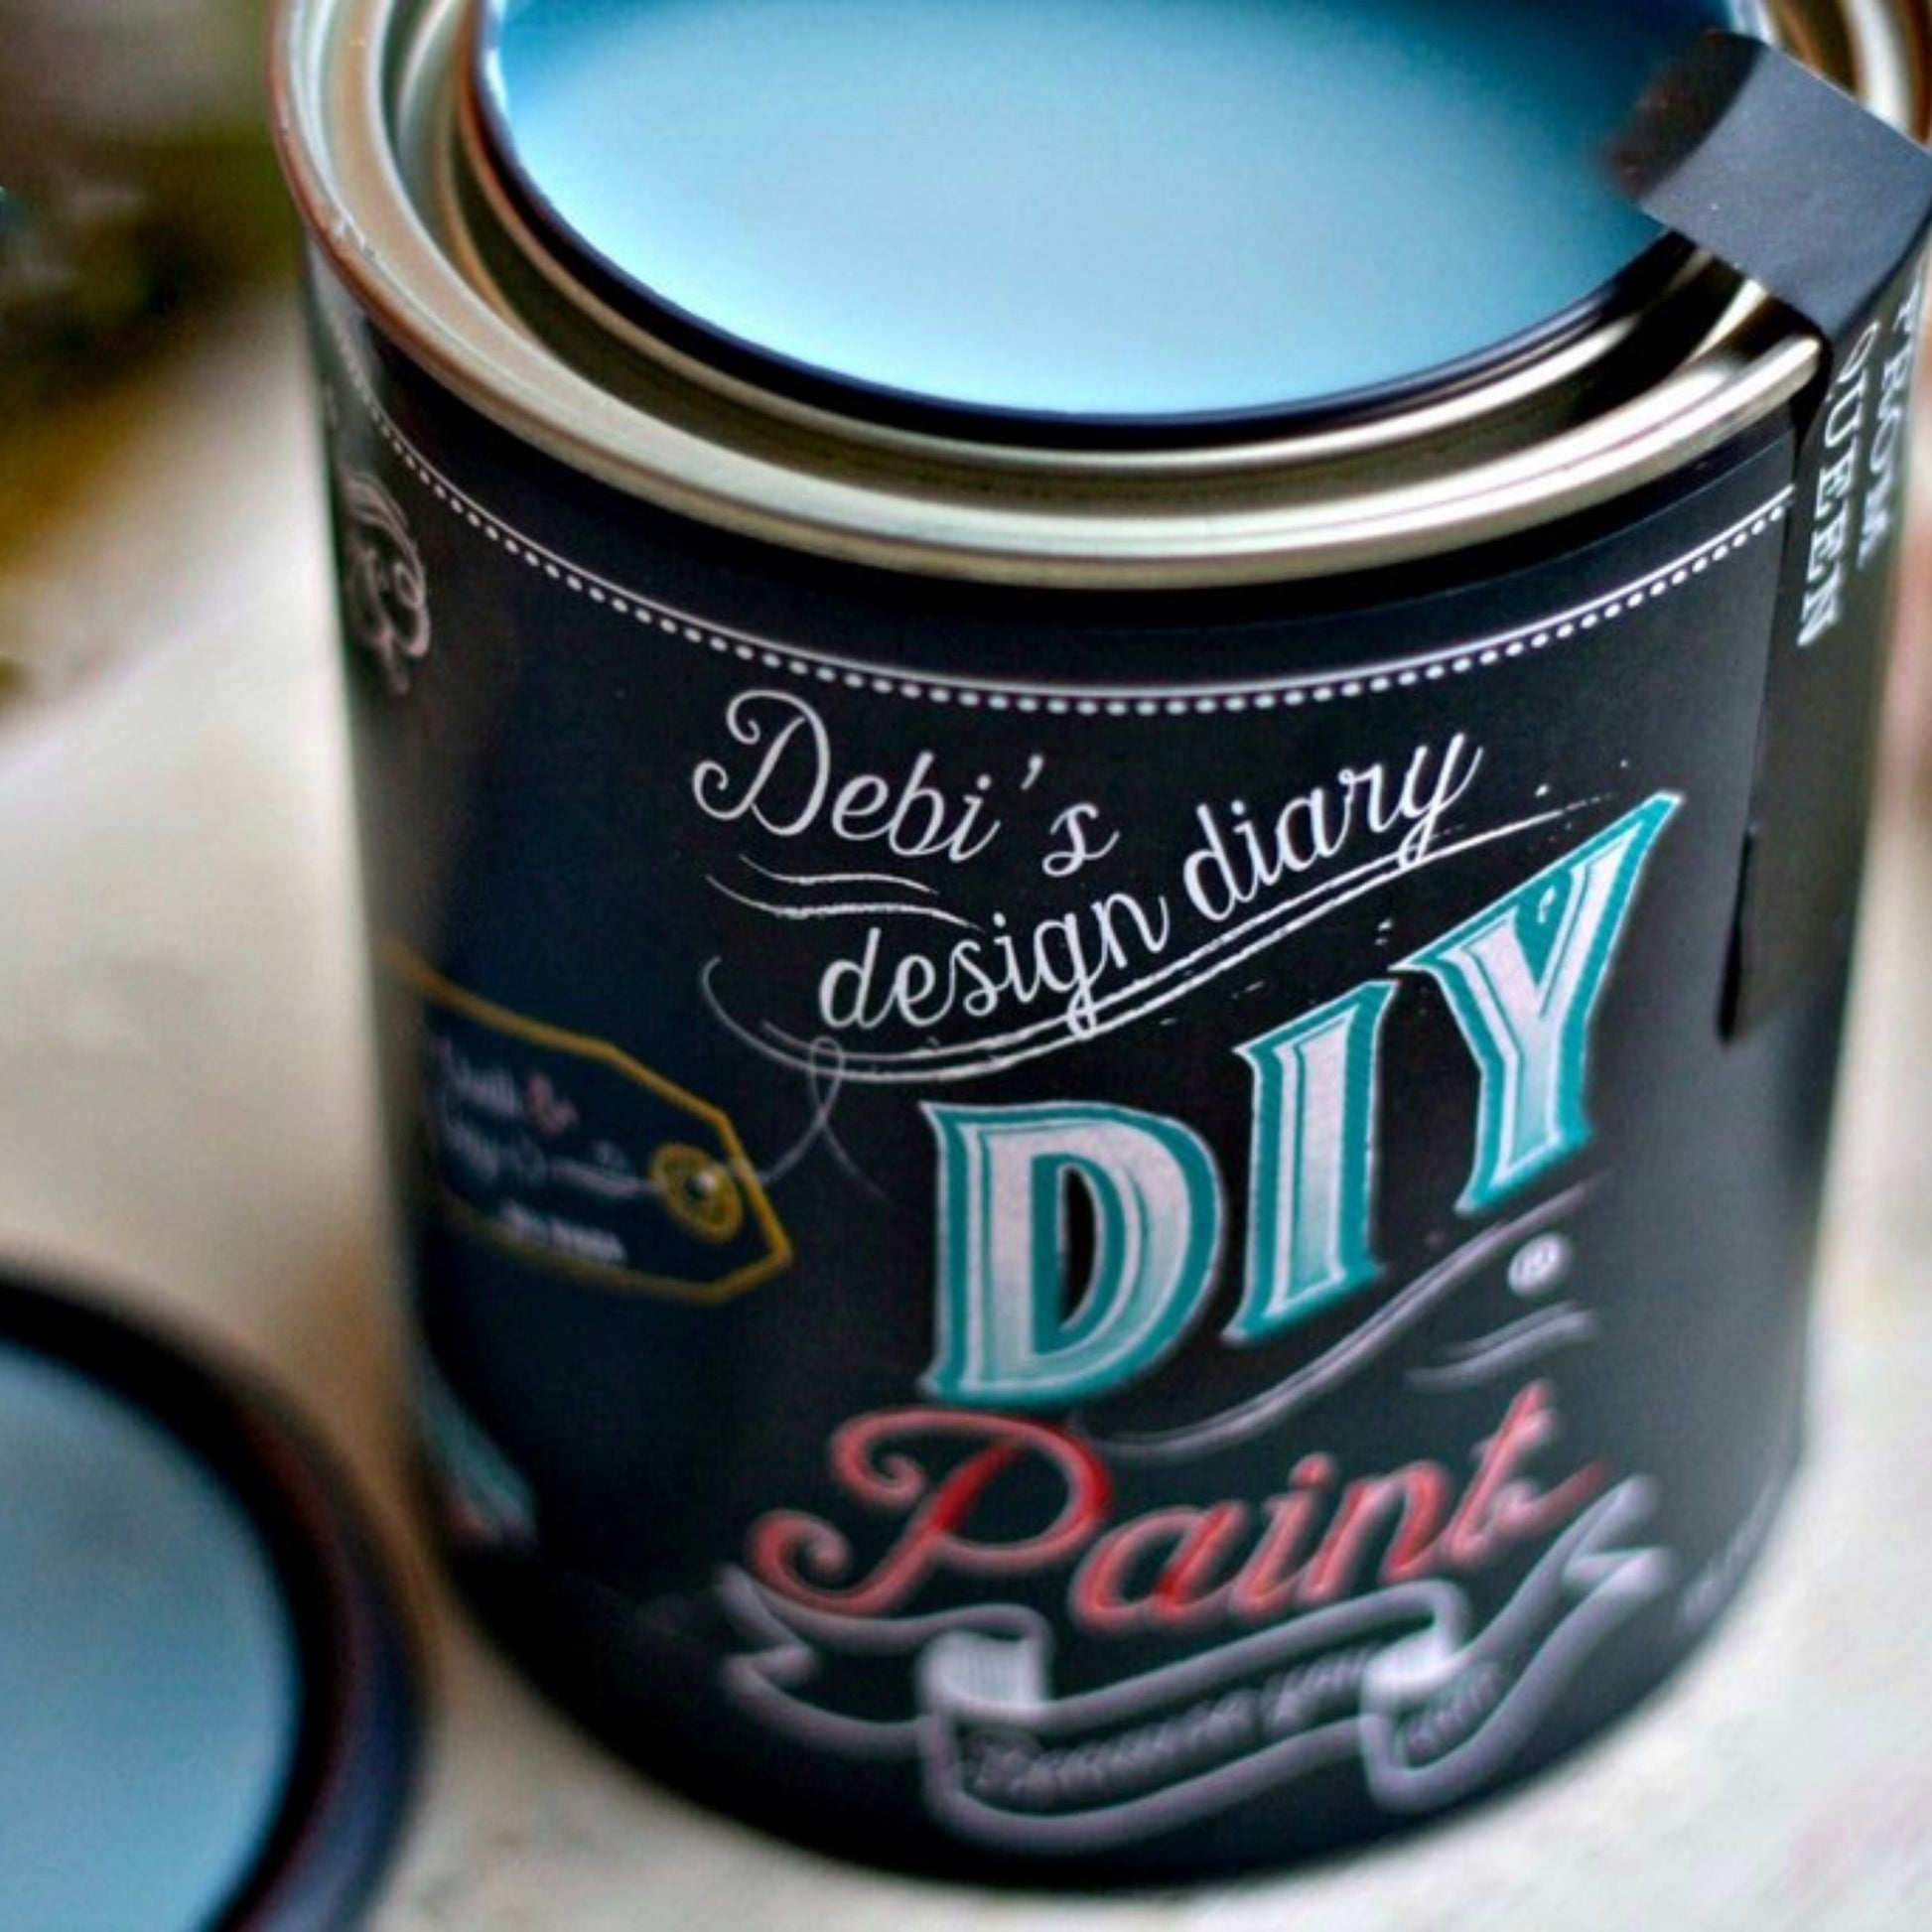 Prom Queen by  Debi's Design Diary DIY Paint available at Milton's Daughter